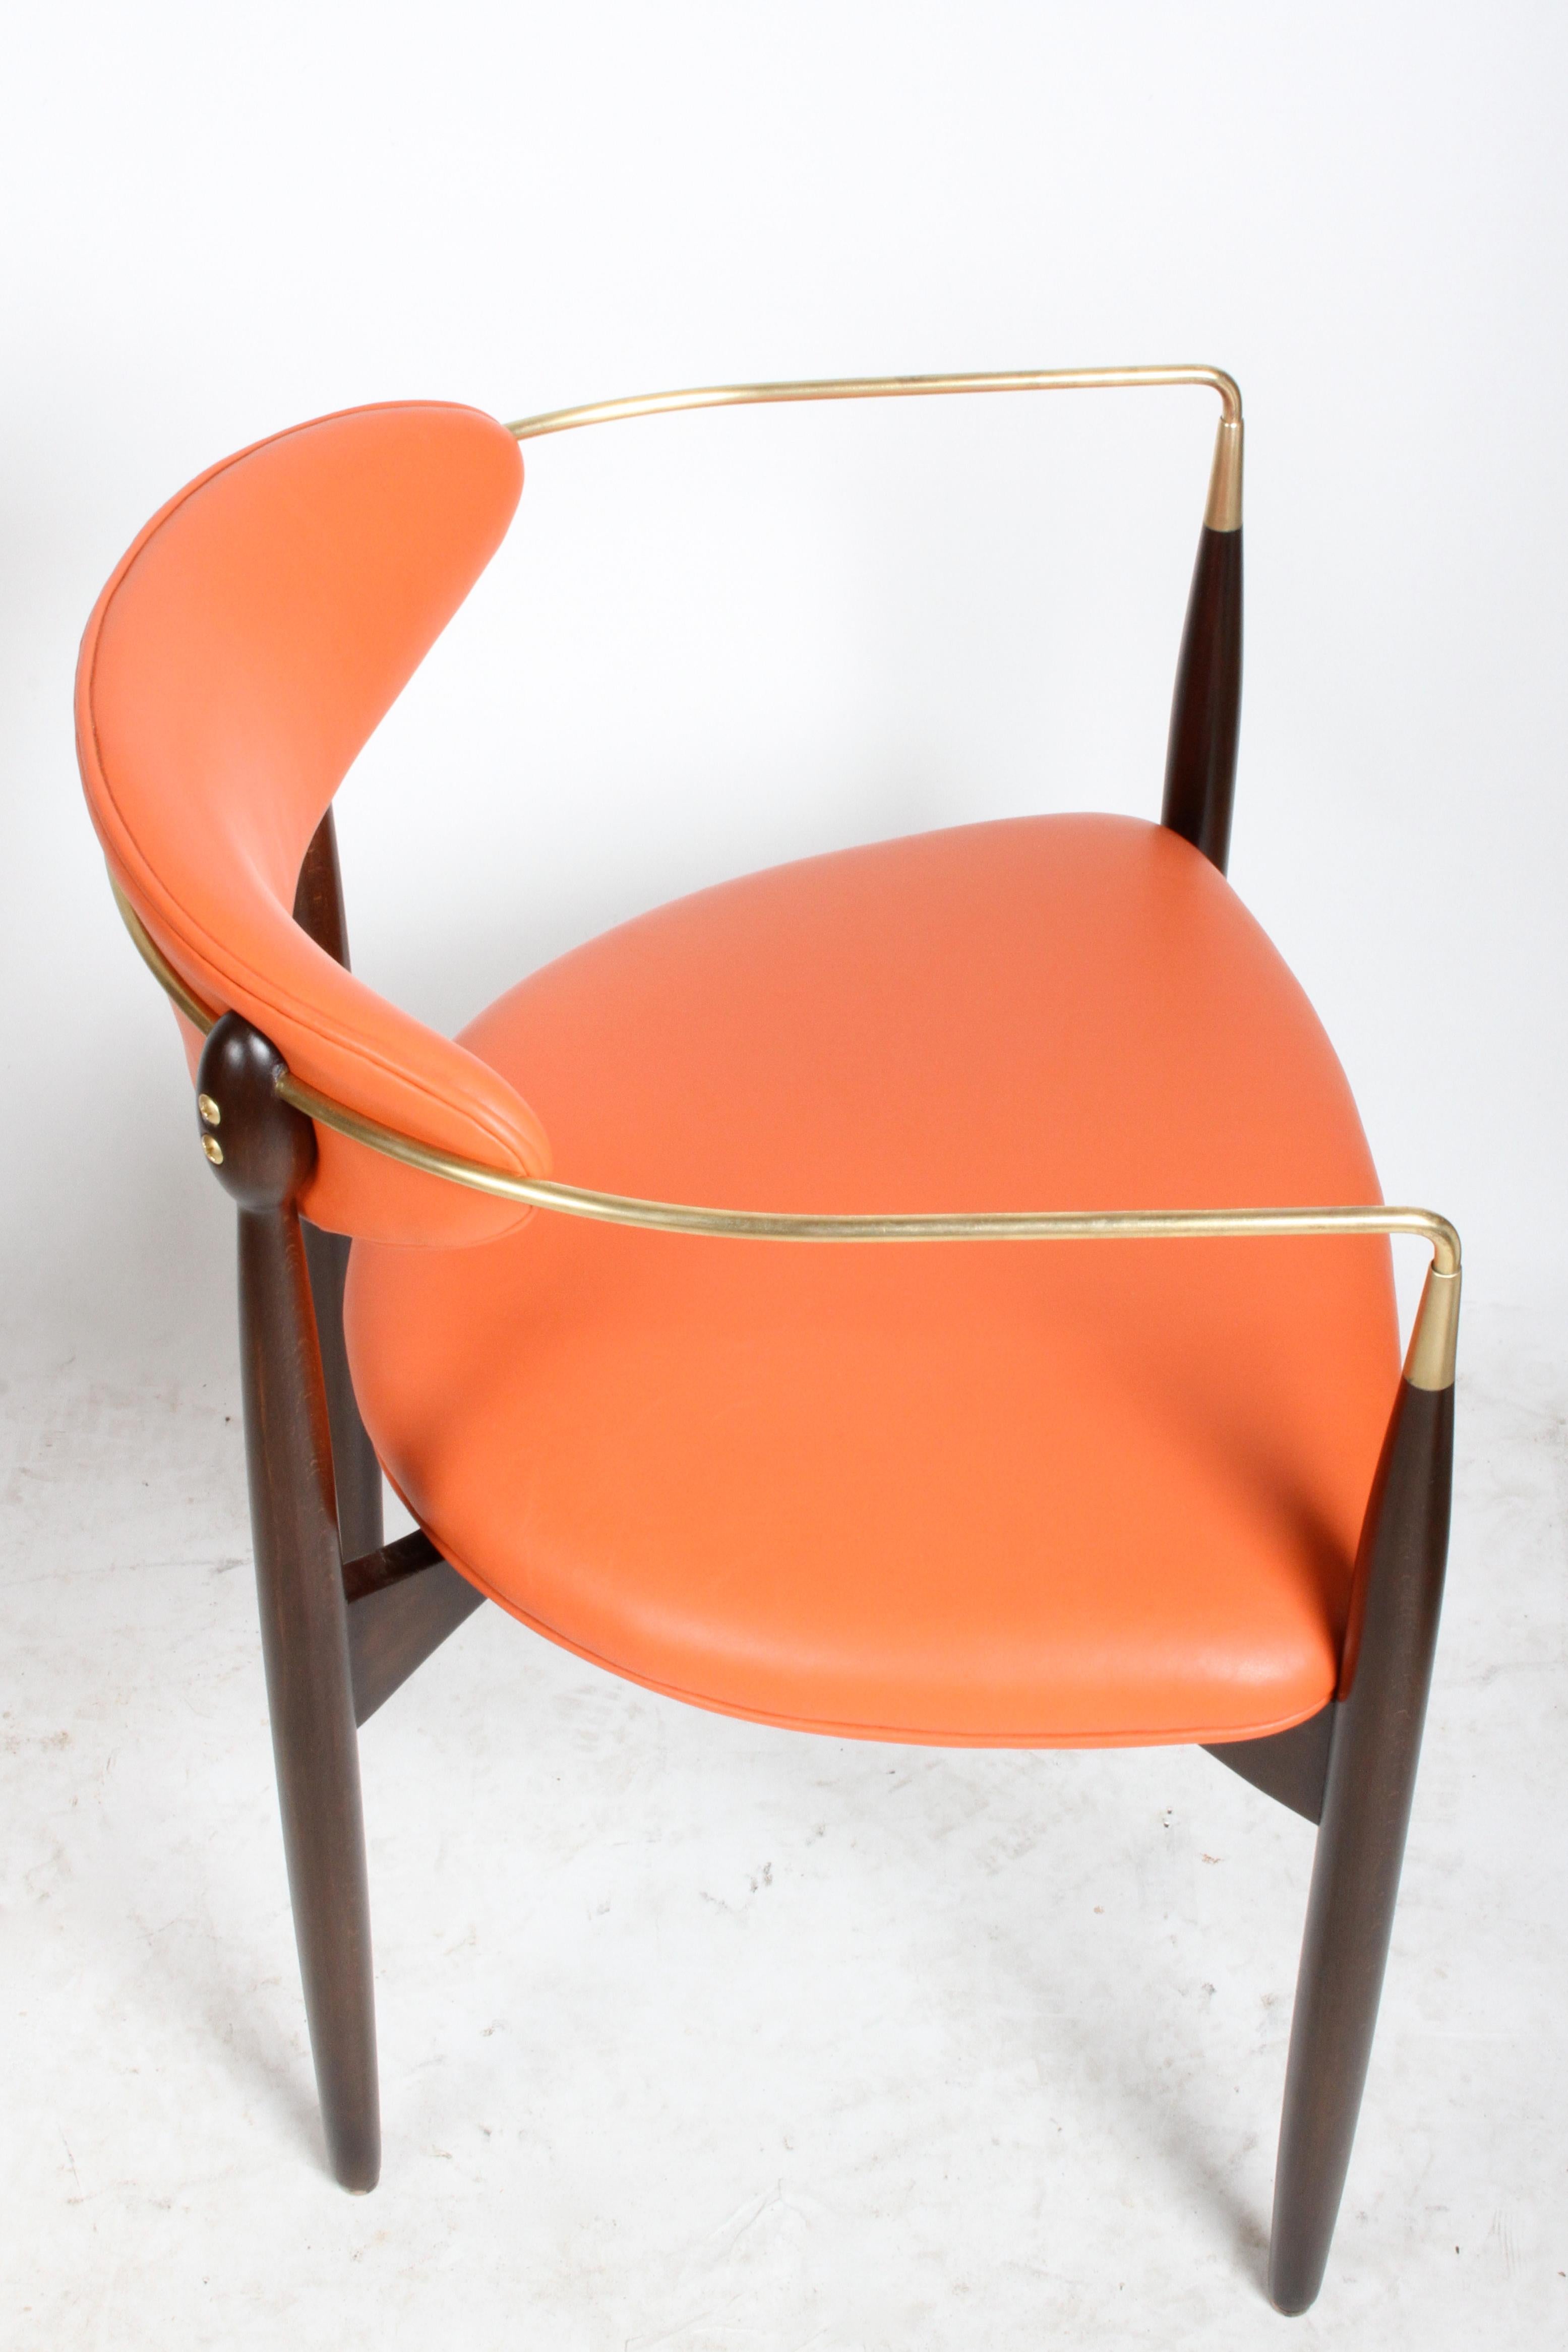 Completely Restored Dan Johnson for Viscount Mid-Century Brass Armchair 1950s For Sale 1